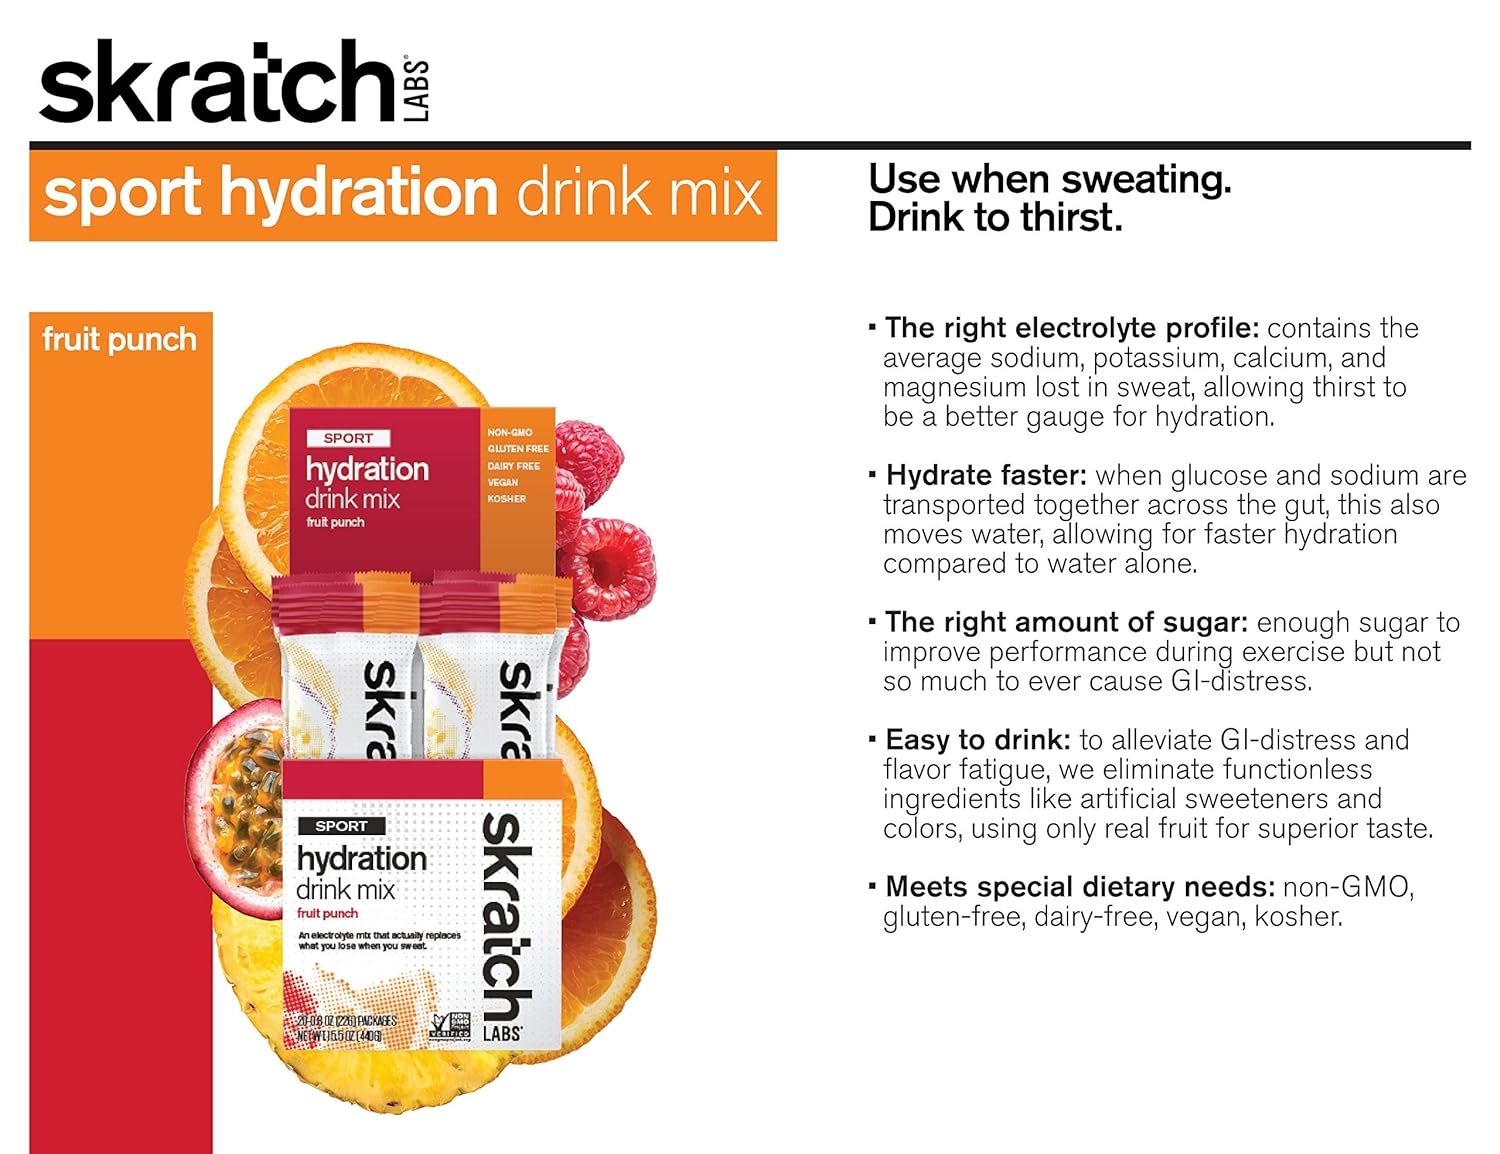 SKRATCH LABS Sport Hydration Drink Mix, Fruit Punch (20 Single Serving Packets) - Electrolyte Powder Developed for Athletes and Sports Performance, Gluten Free, Vegan, Kosher